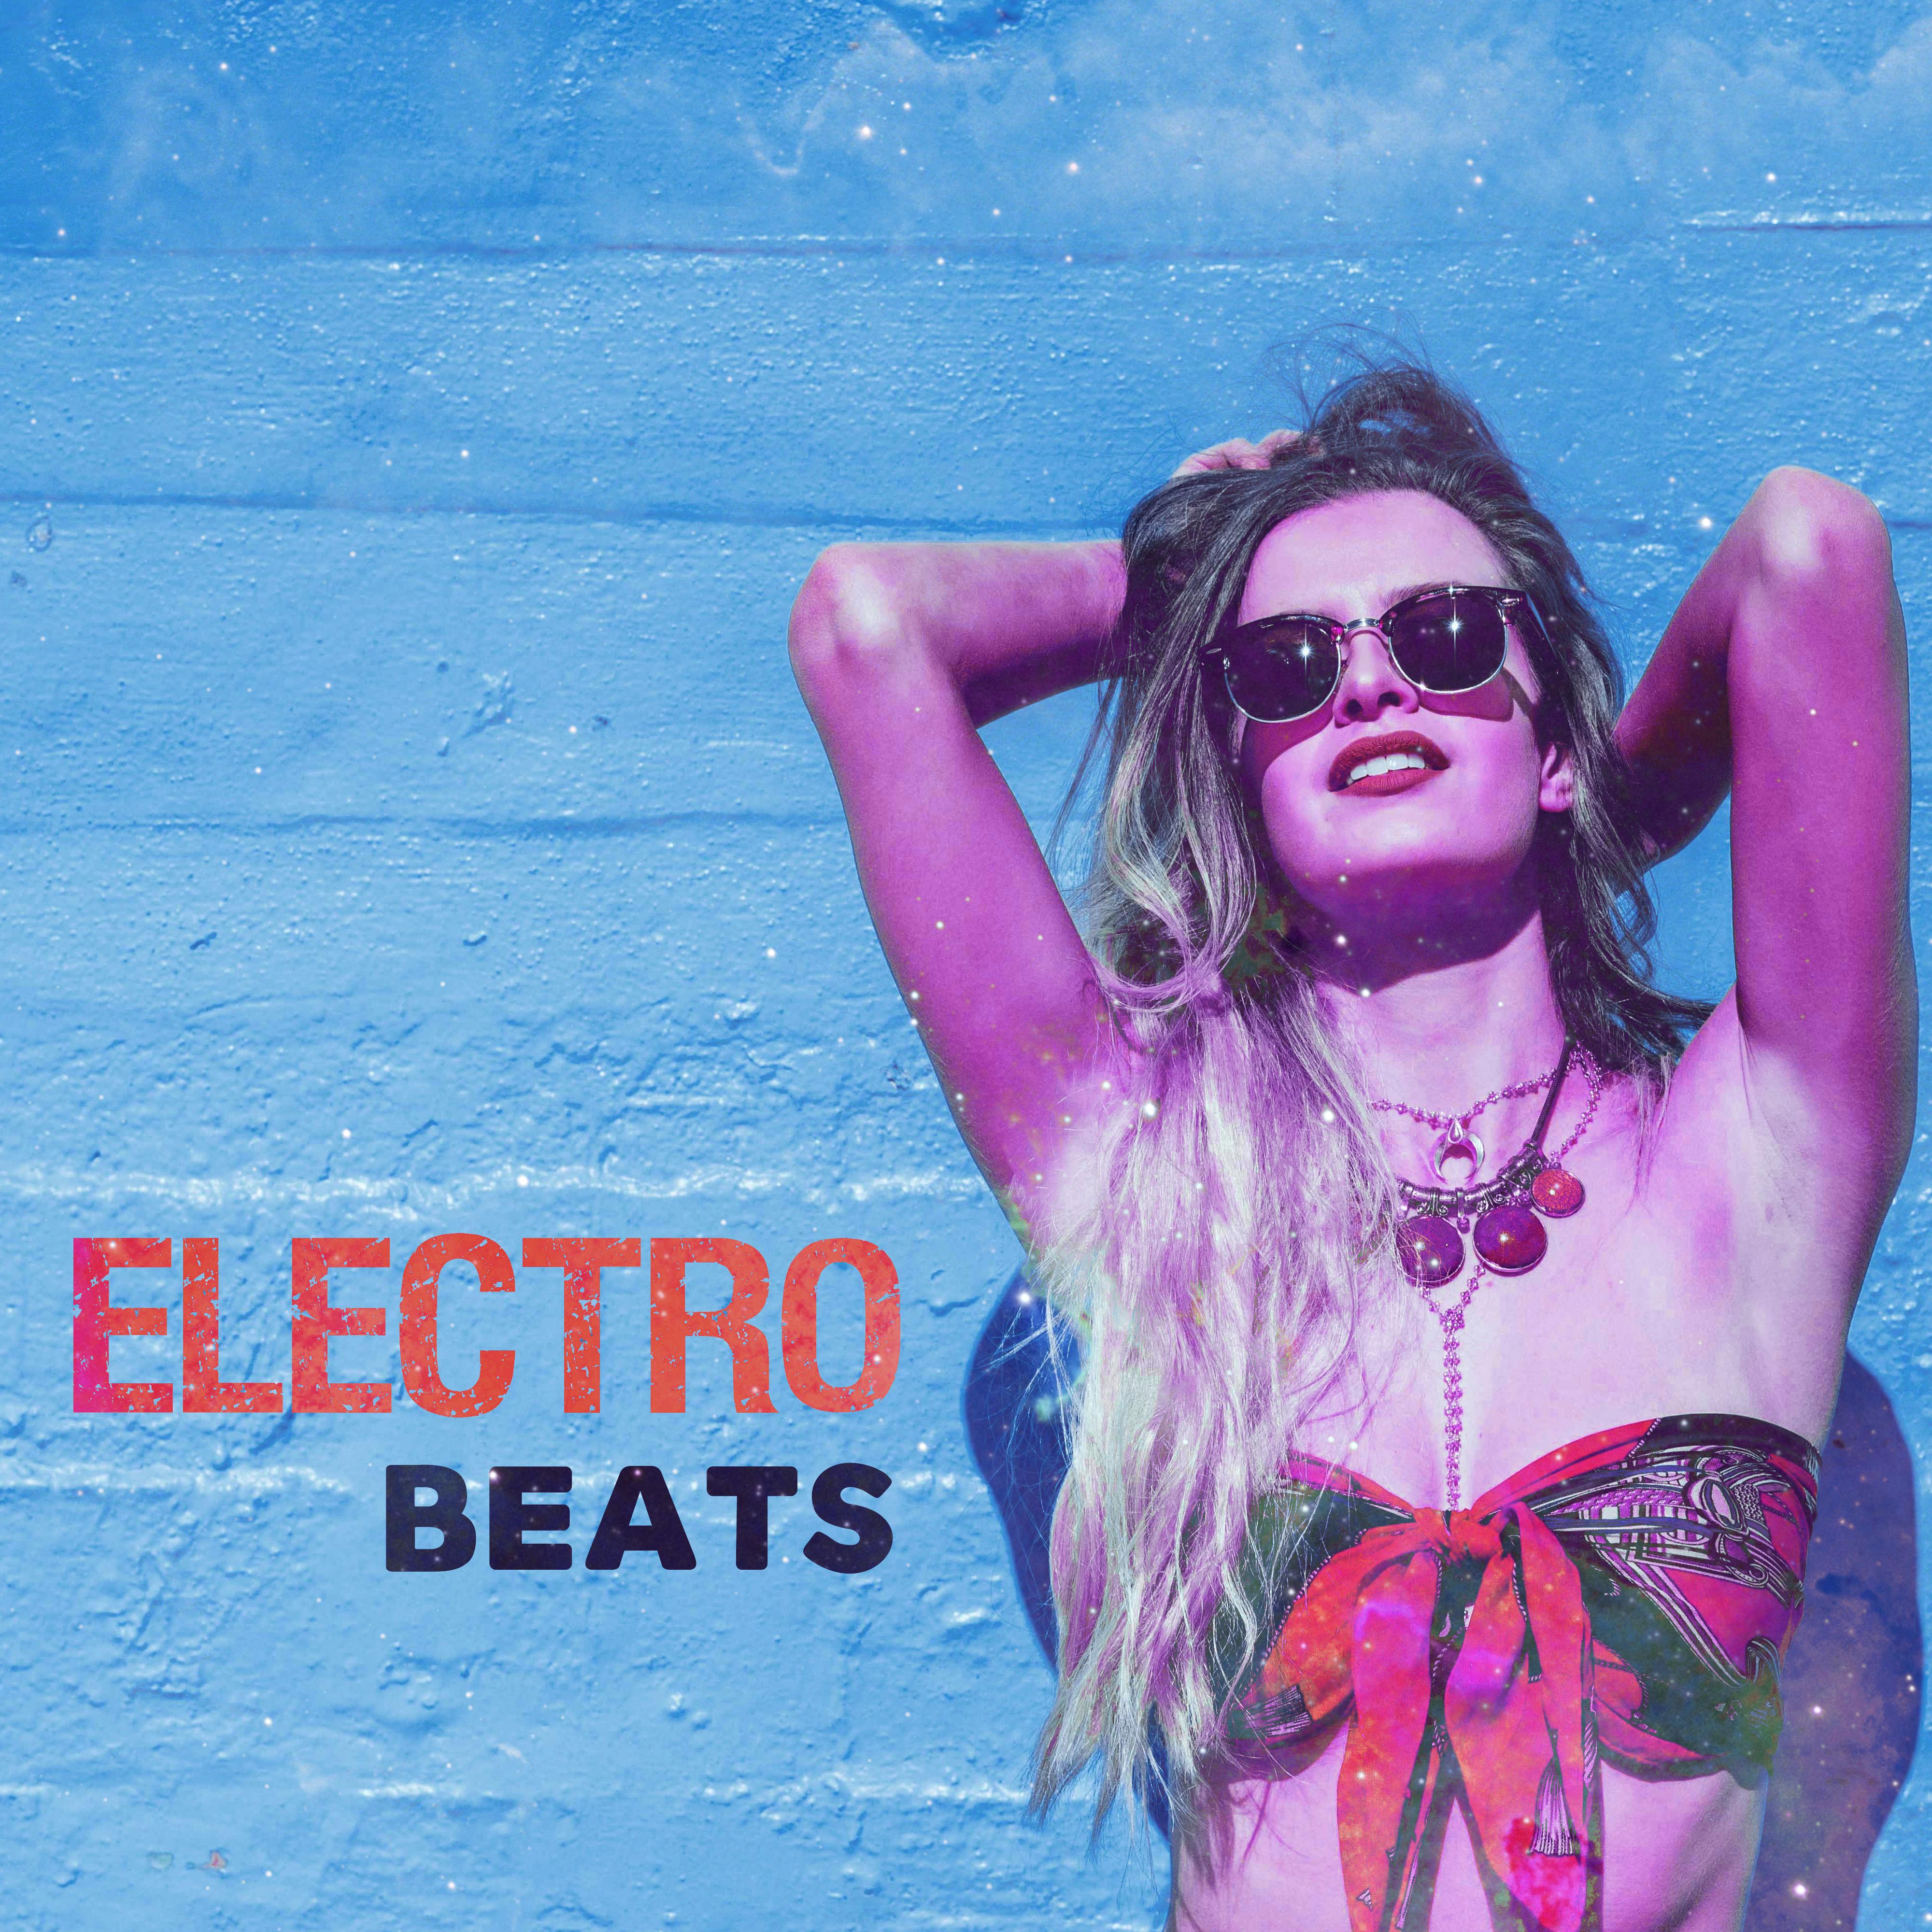 Electro Beats – 2017 Chill Out Music, Electro Beats, Ambient Lounge, Summer Vibes